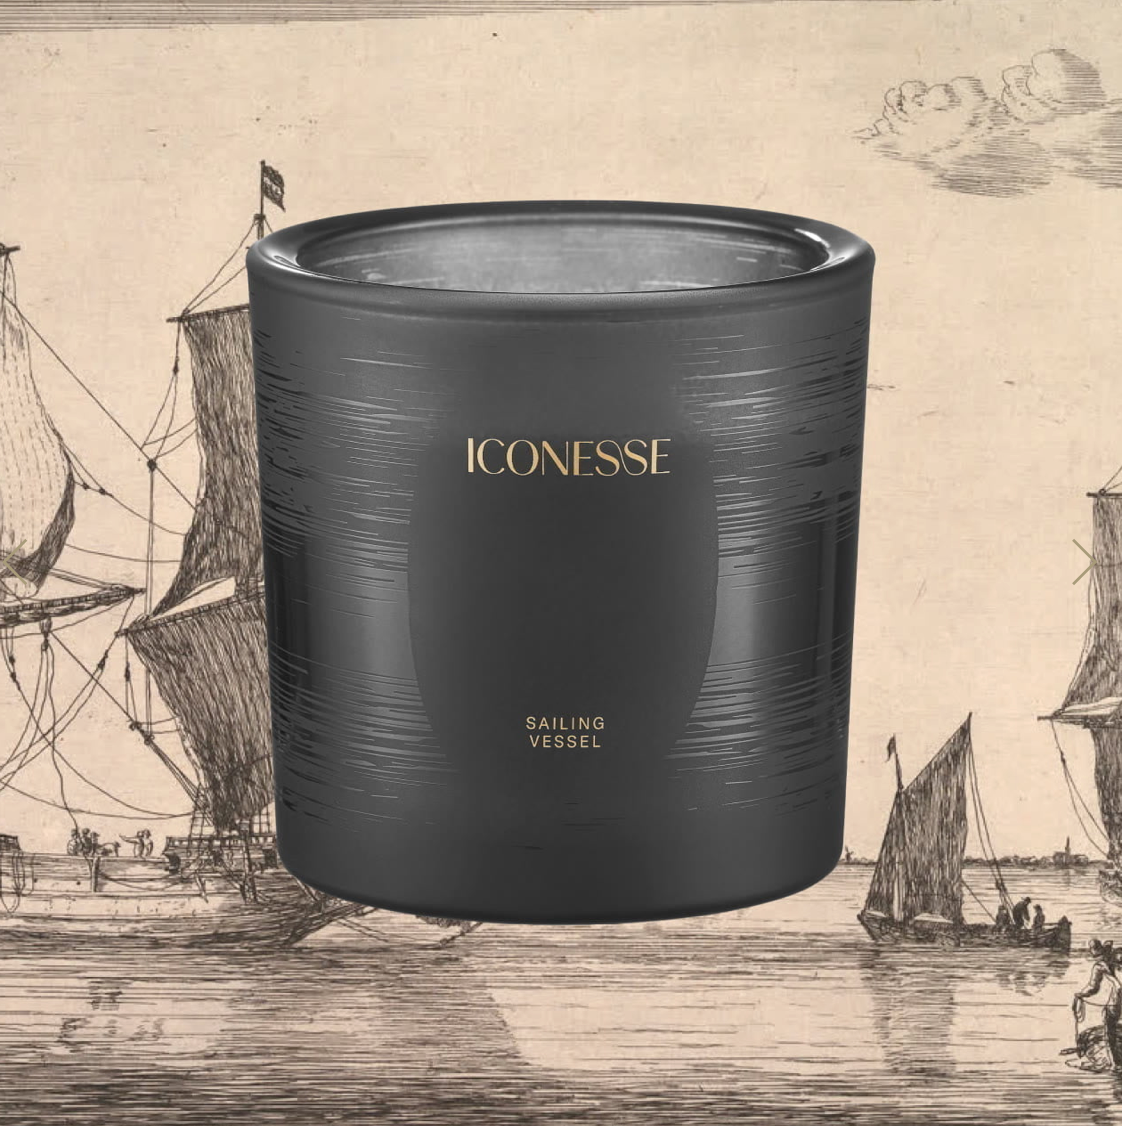 Sailing Vessel candle by Iconesse